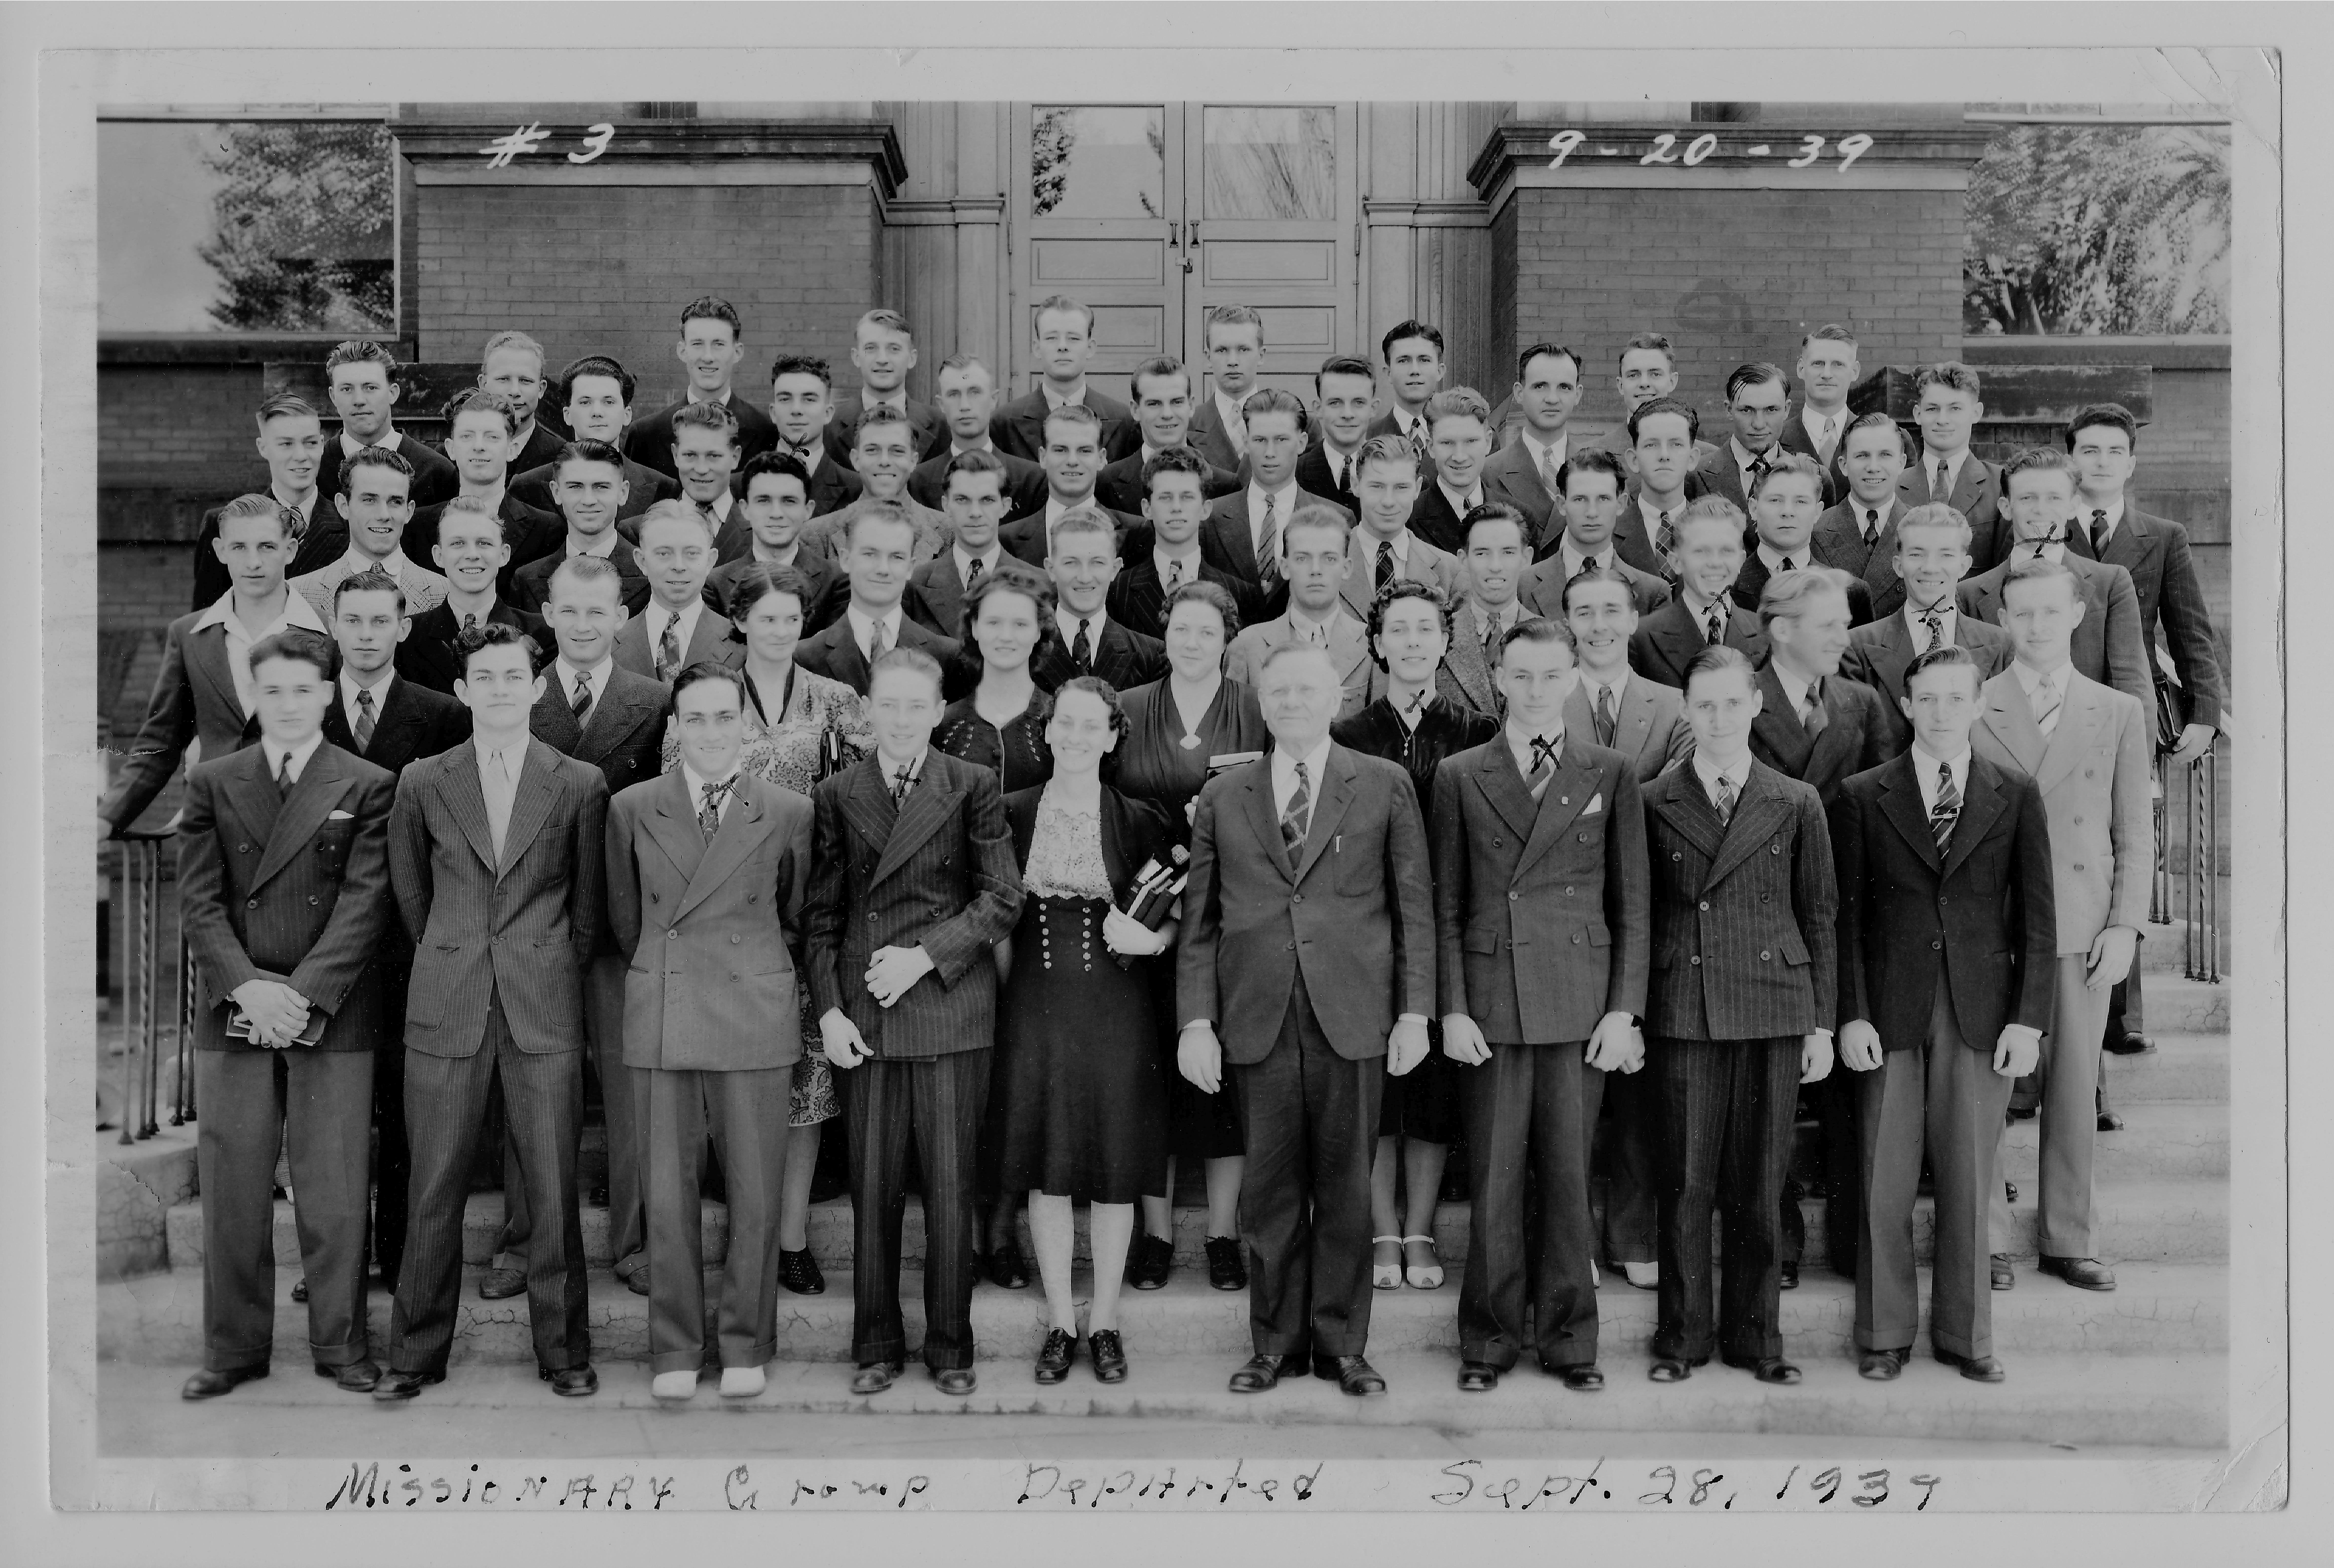 MTC Missionary Camp September 20, 1939